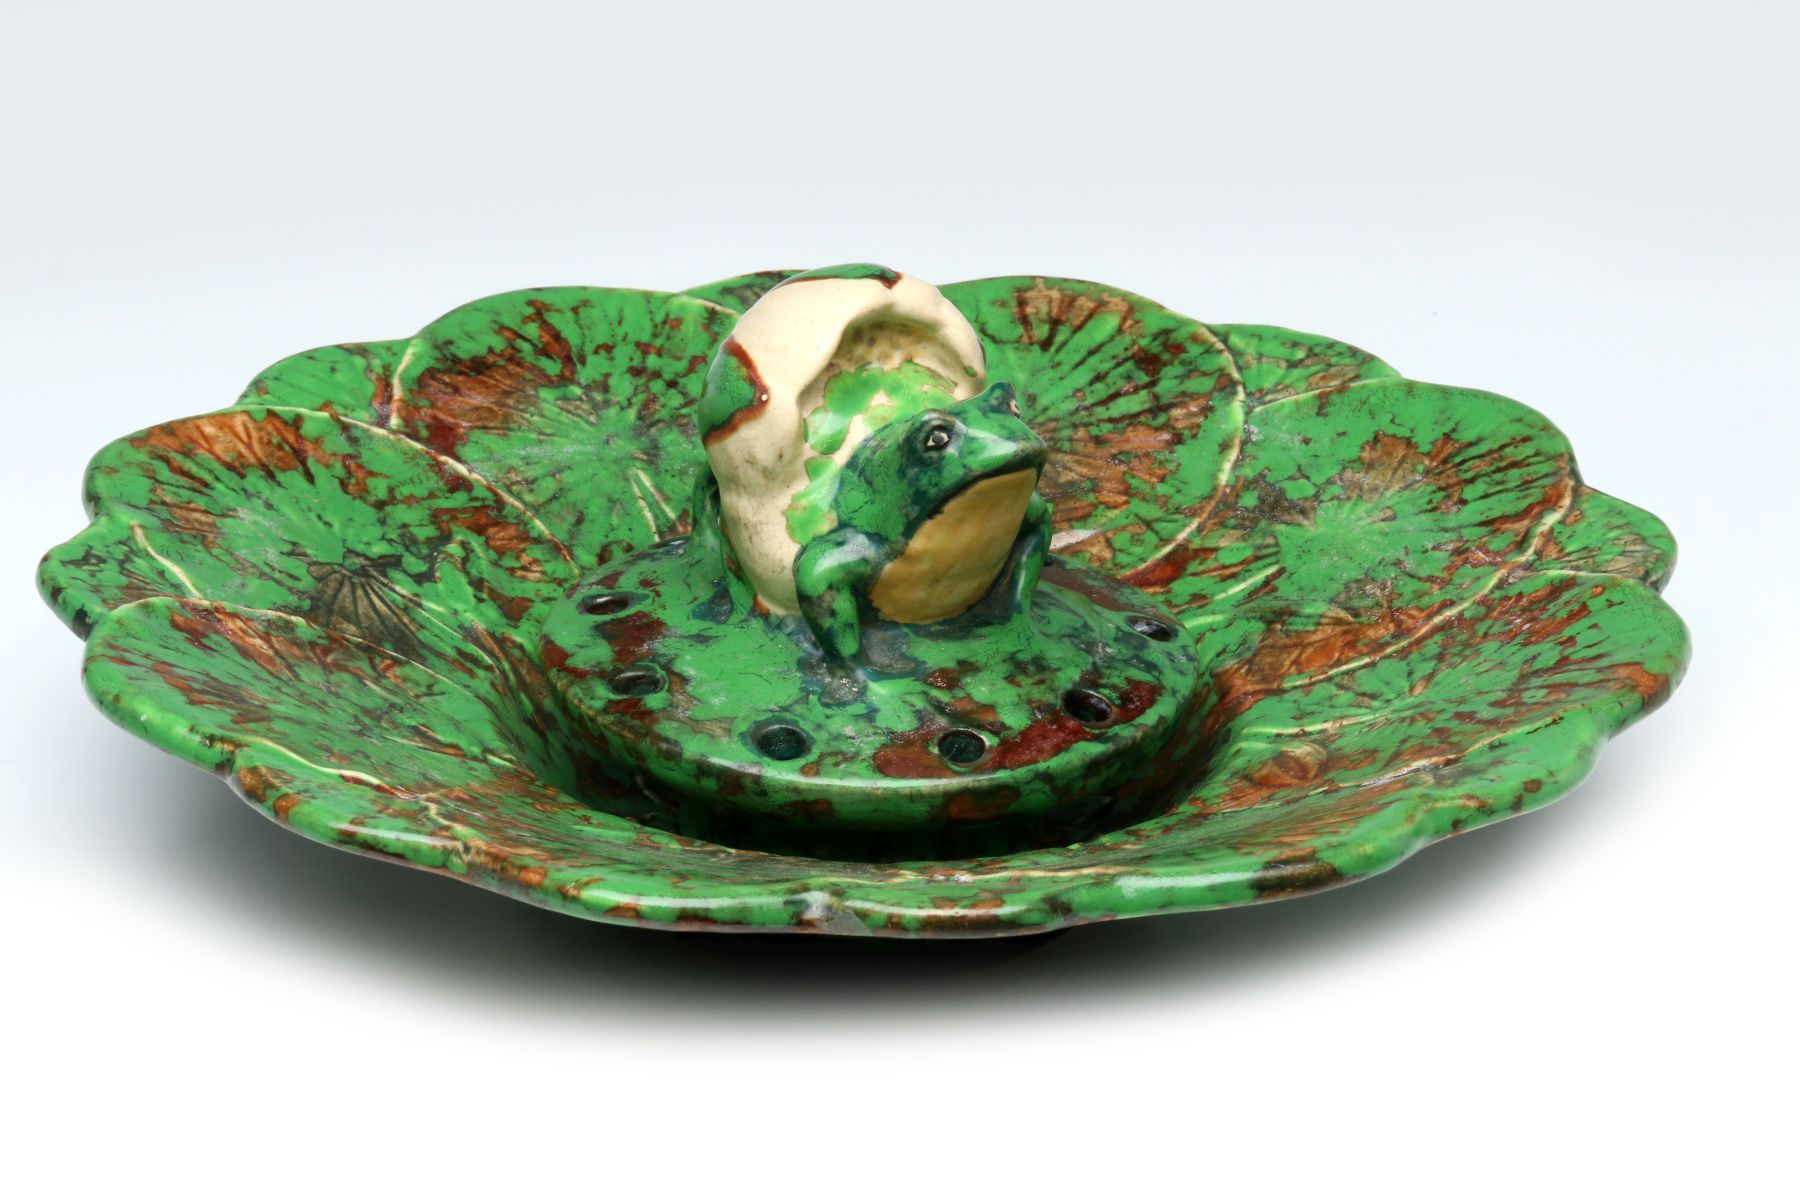 WELLER 'COPPERTONE' ART POTTERY CONSOLE BOWL WITH FROG